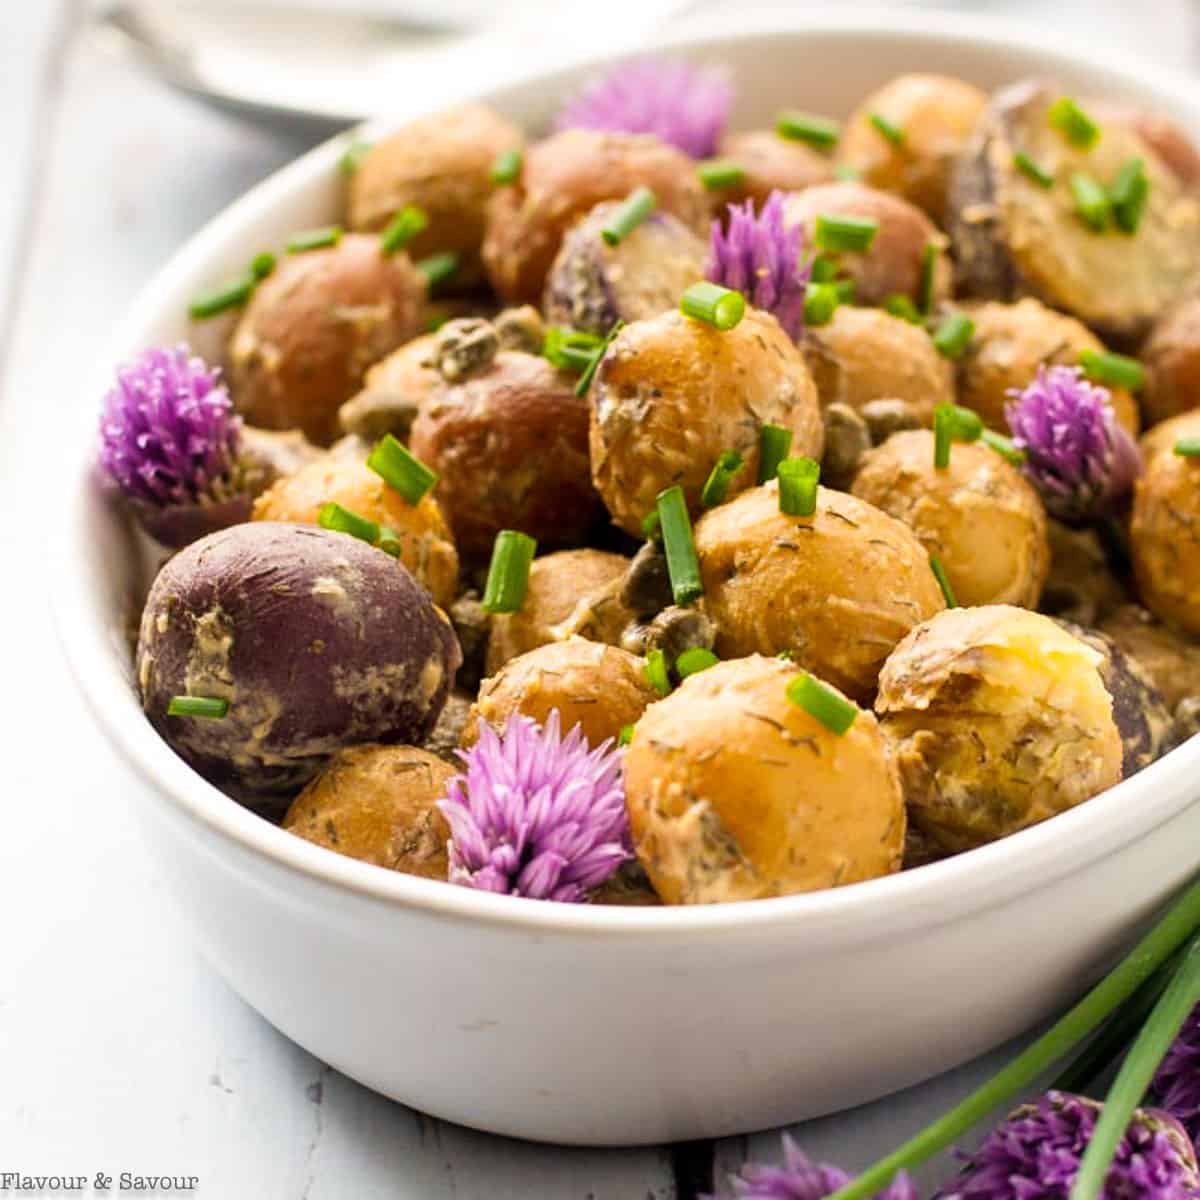 A bowl of potato salad garnished with chives and chive flowers.